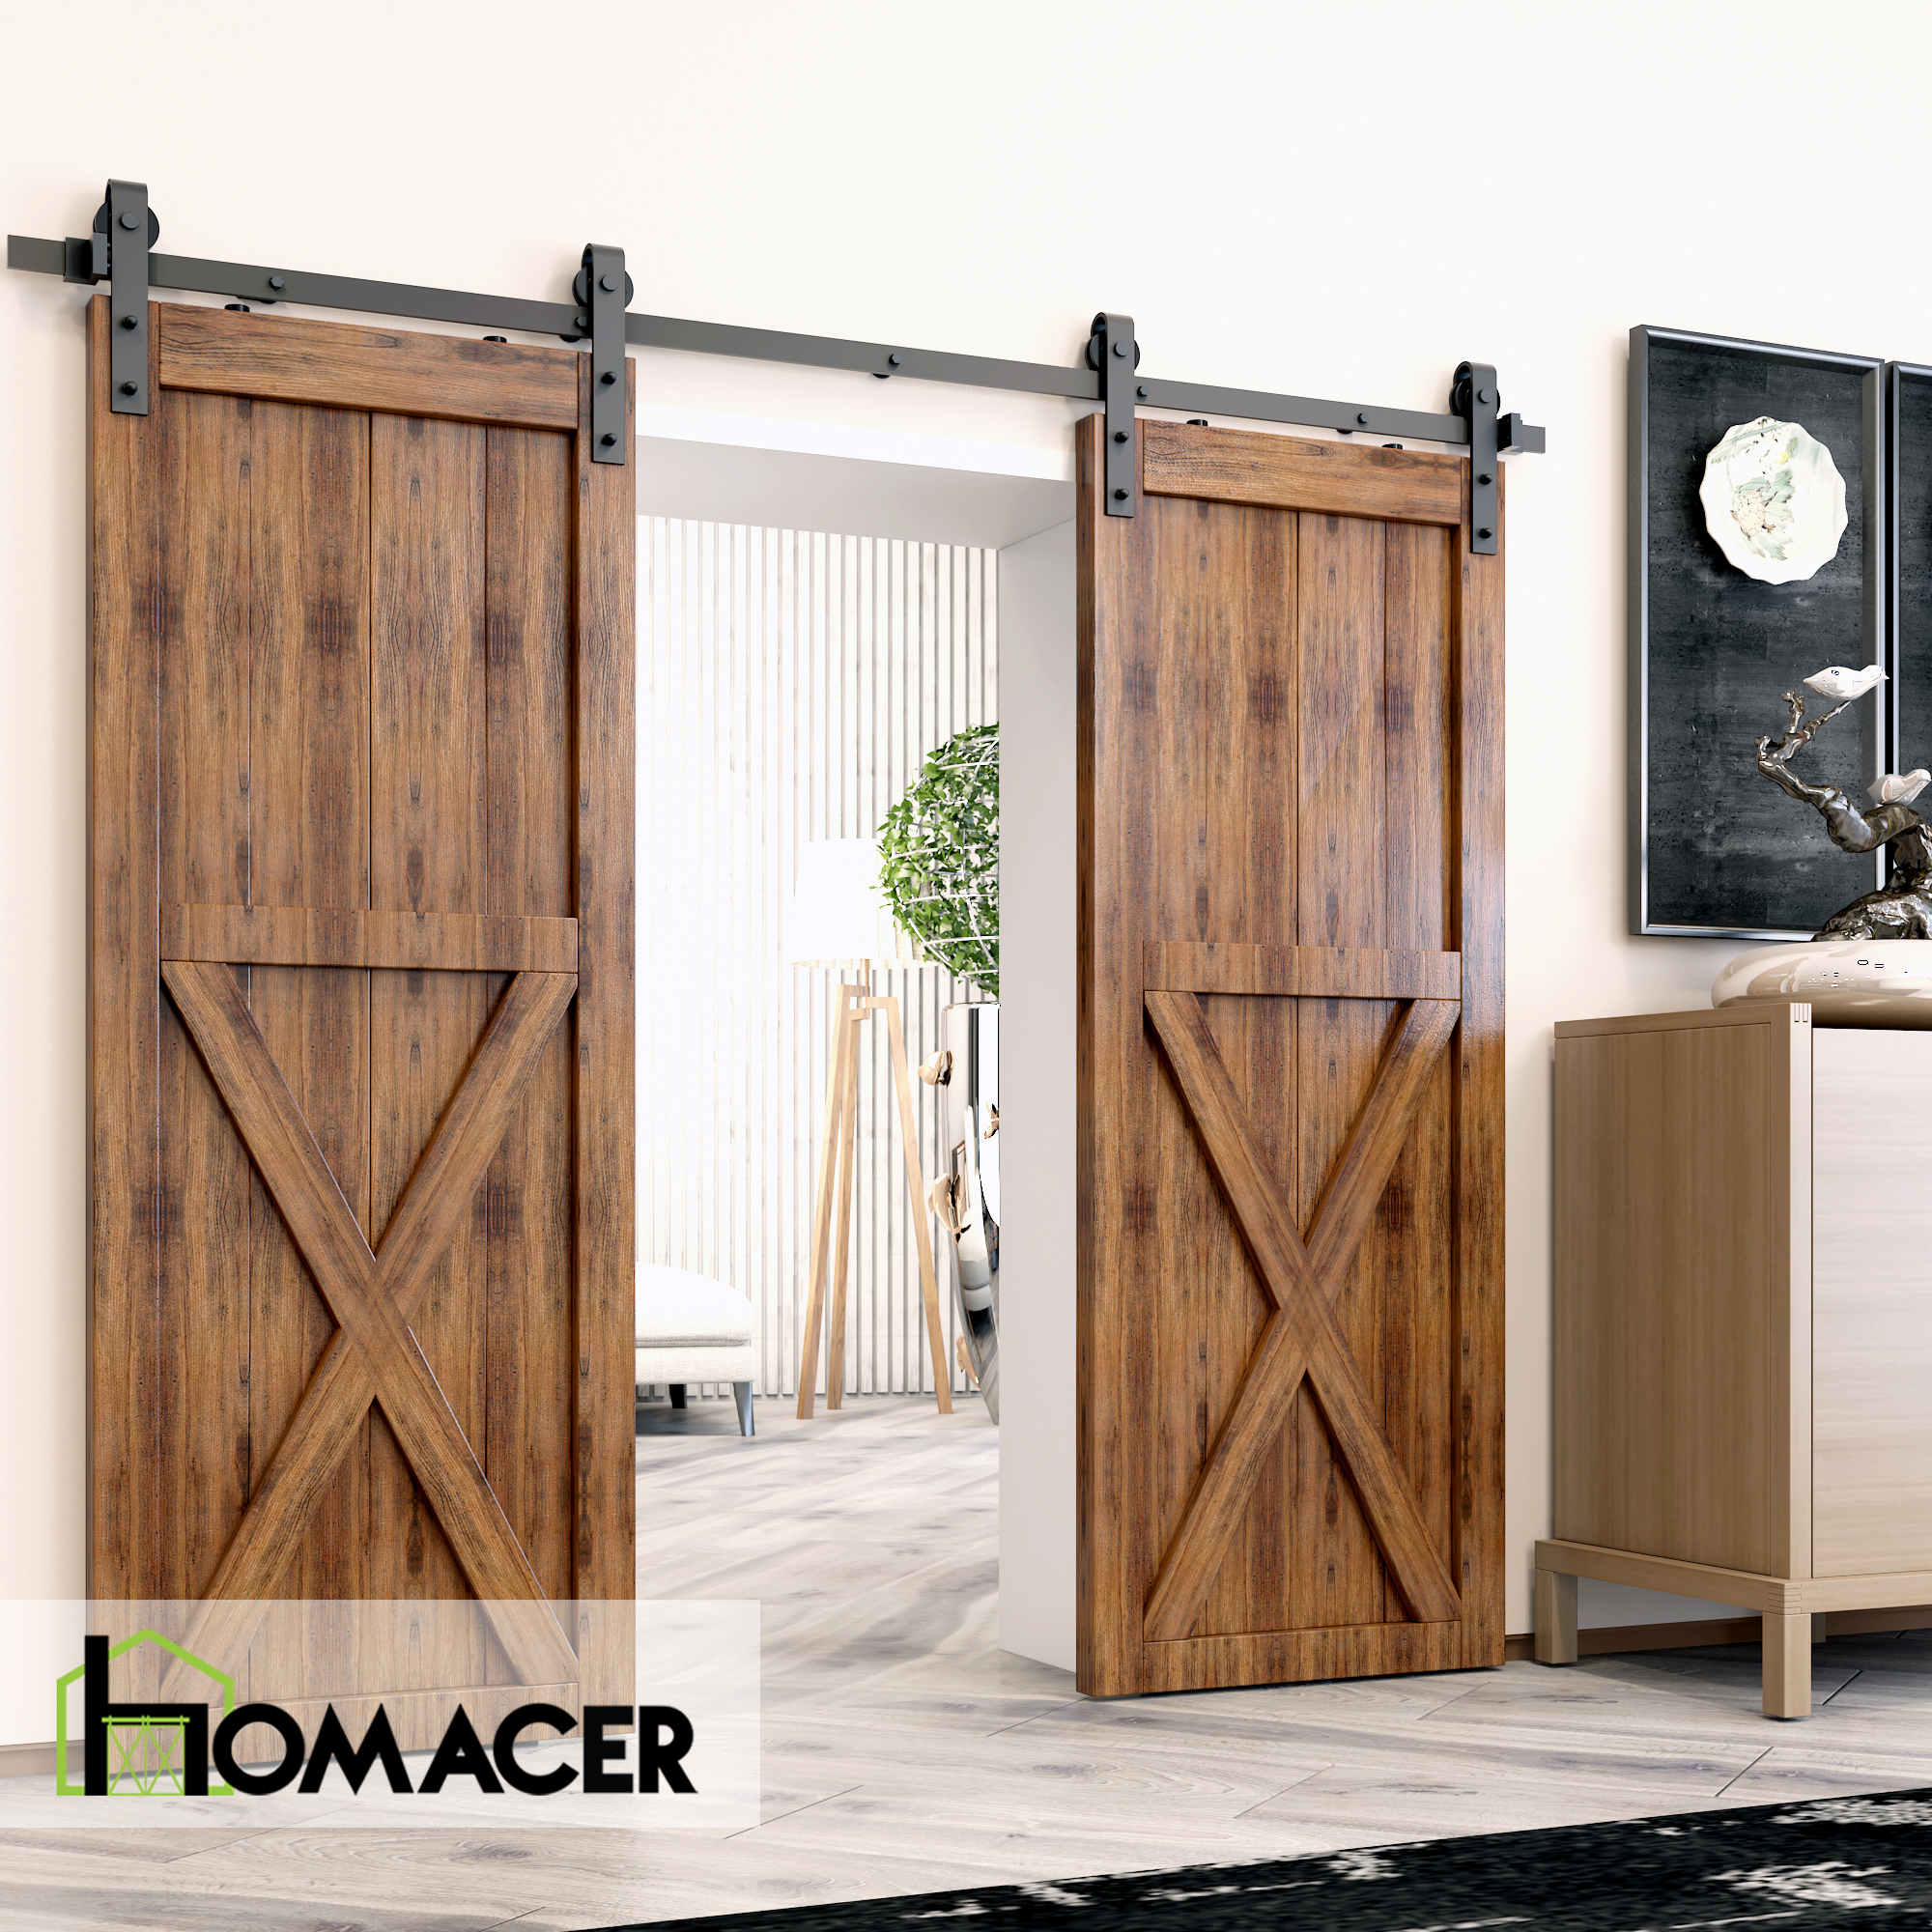 Homacer Black Rustic Sliding Barn Door Hardware Kit, for Two/Double Doors, 8ft Long Flat Track, Classic Design Roller, Heavy Duty, for Interior & Exterior Use - image 2 of 7